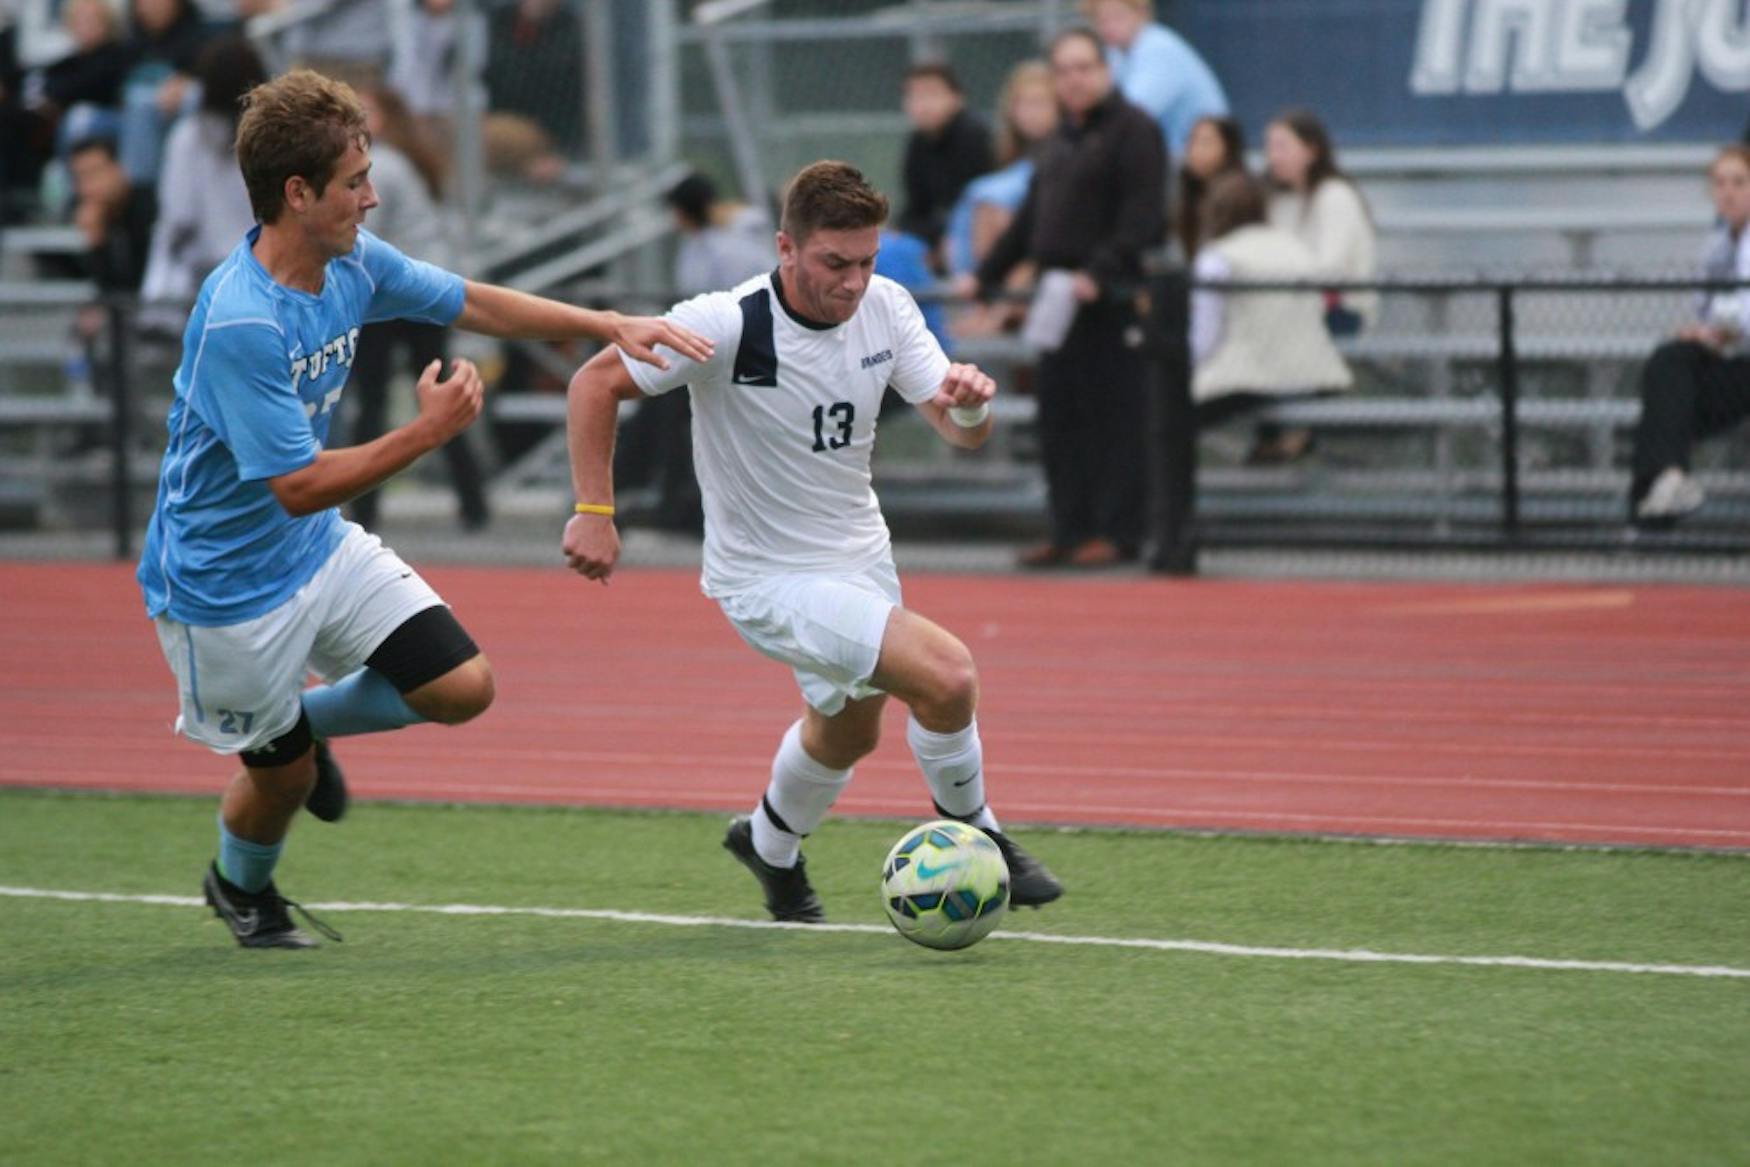 ONE-ON-ONE: Forward Mike Lynch ’17 outruns at Tufts defender during the Judges’ 2-0 victory Saturday on Gordon Field.